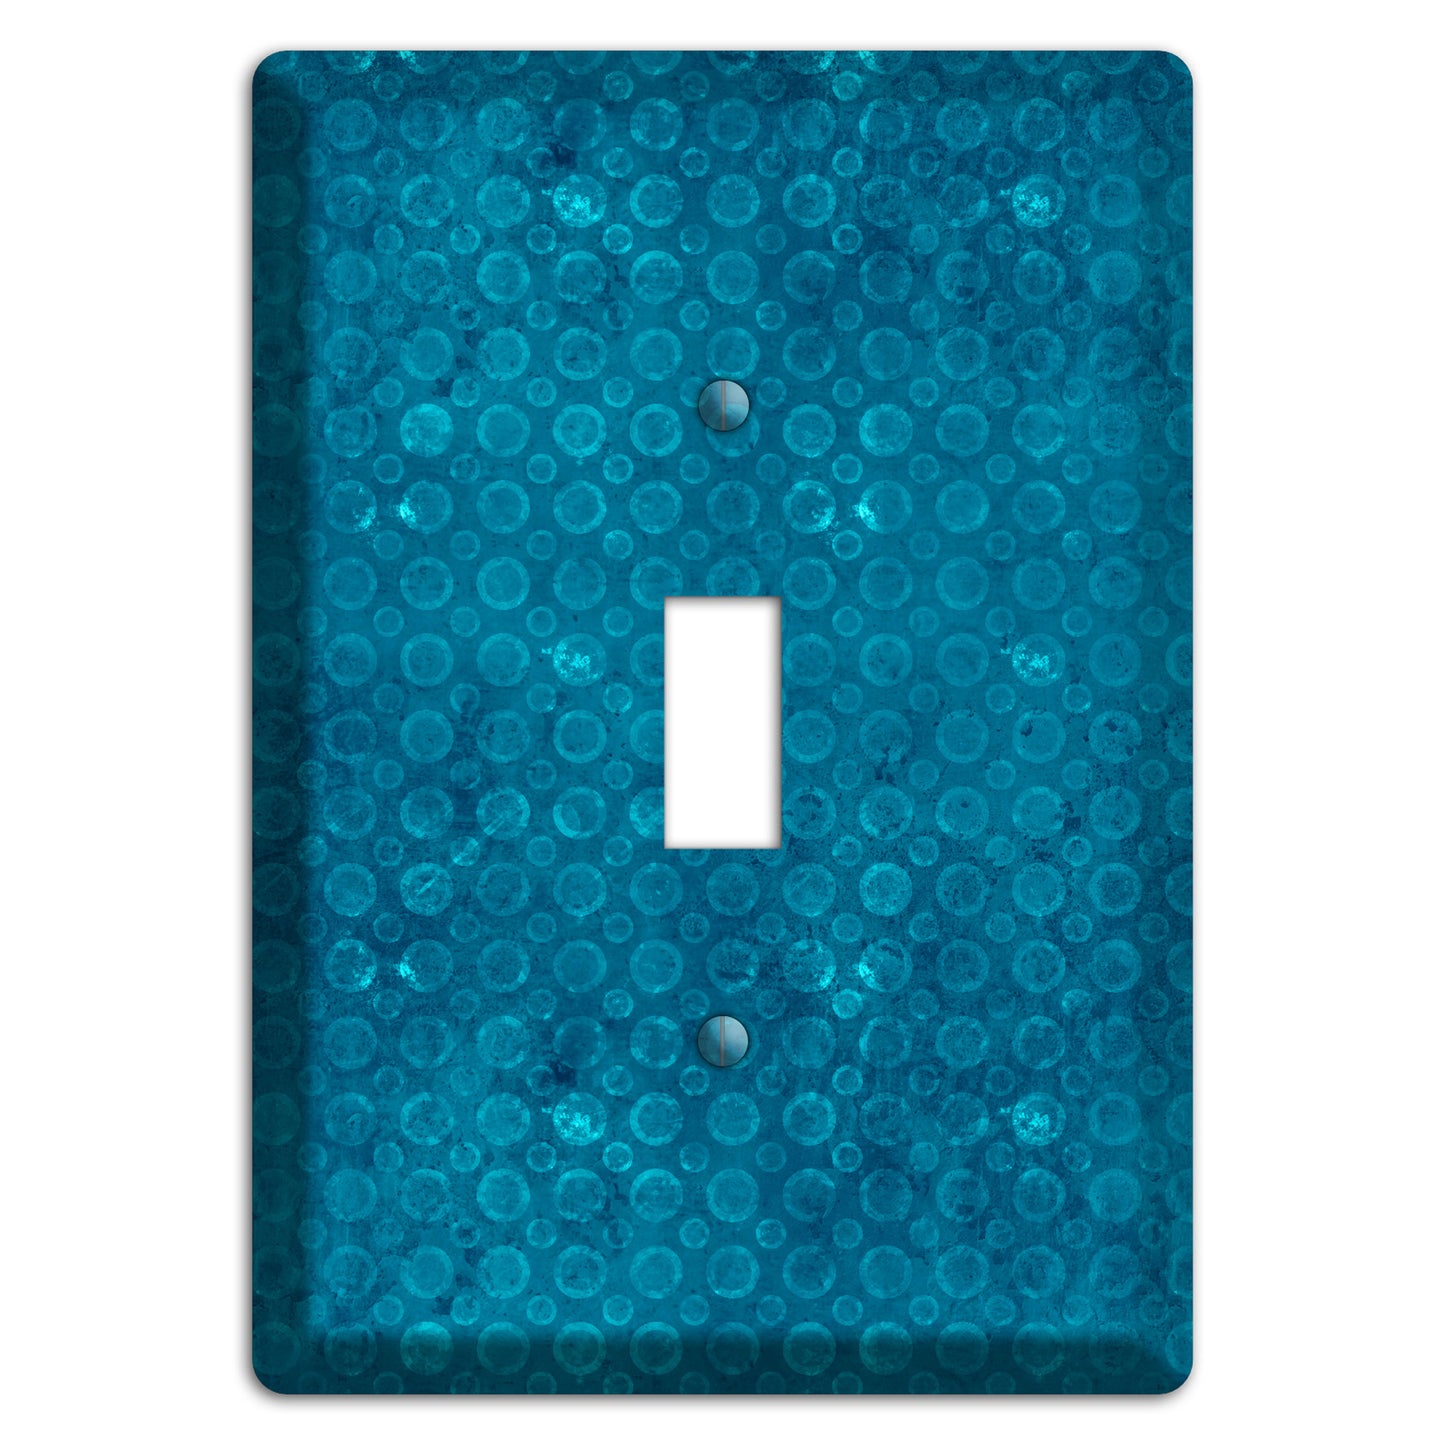 Turquoise Circles Cover Plates